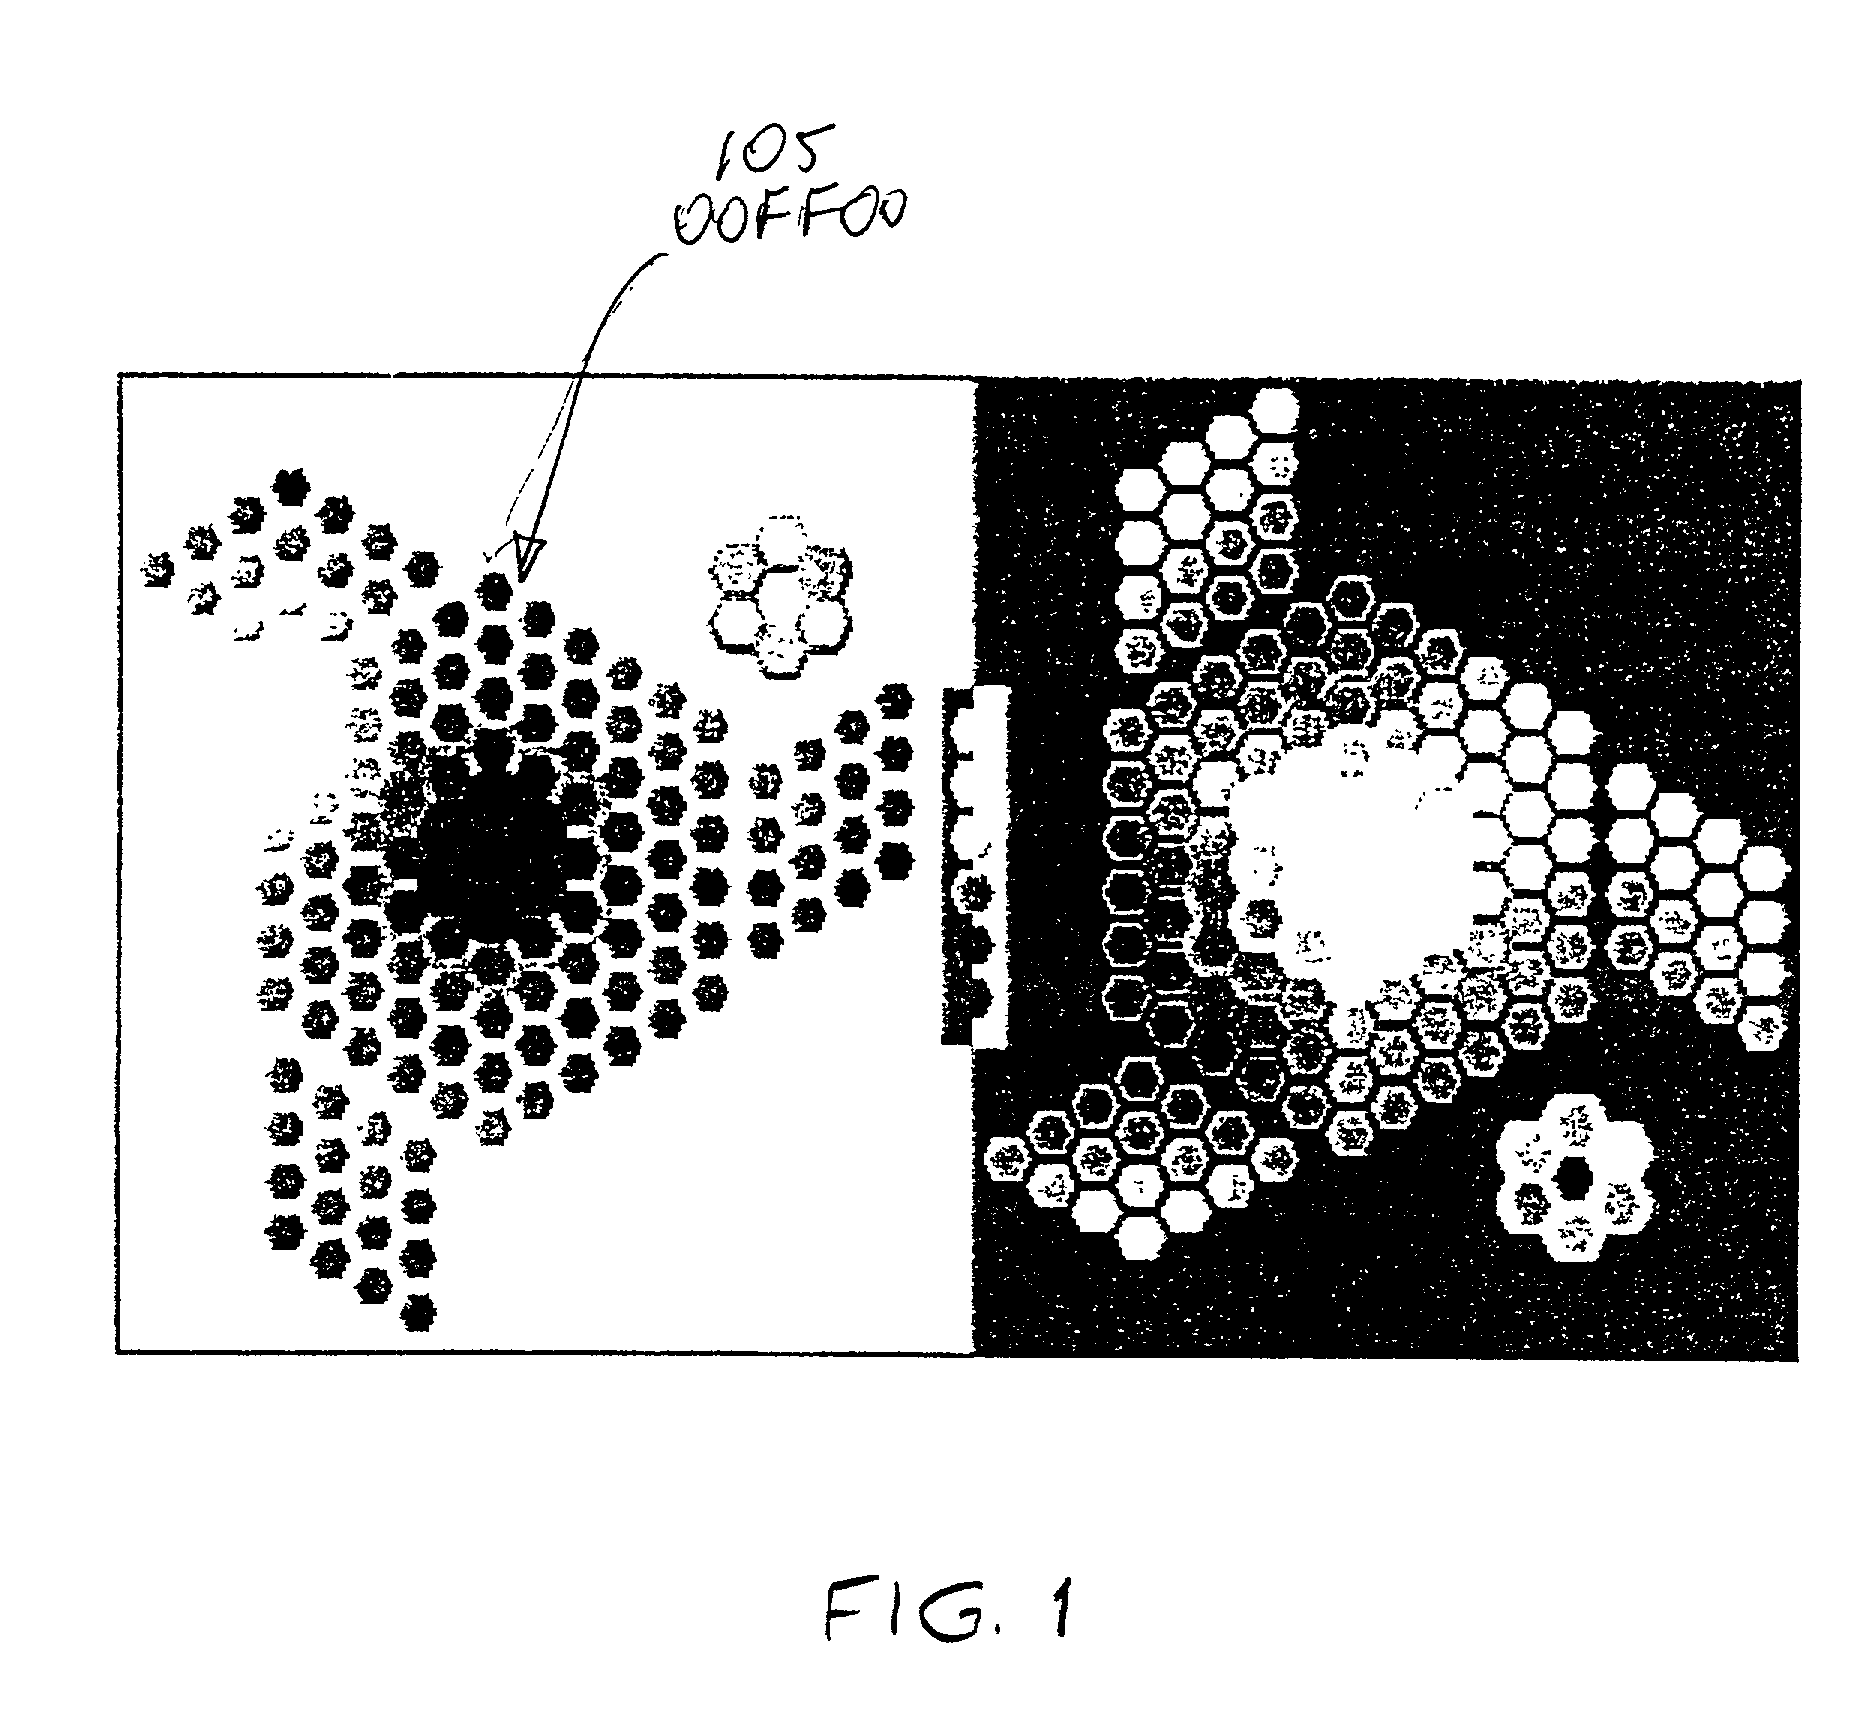 System and method for color-coding objects having multiple attributes